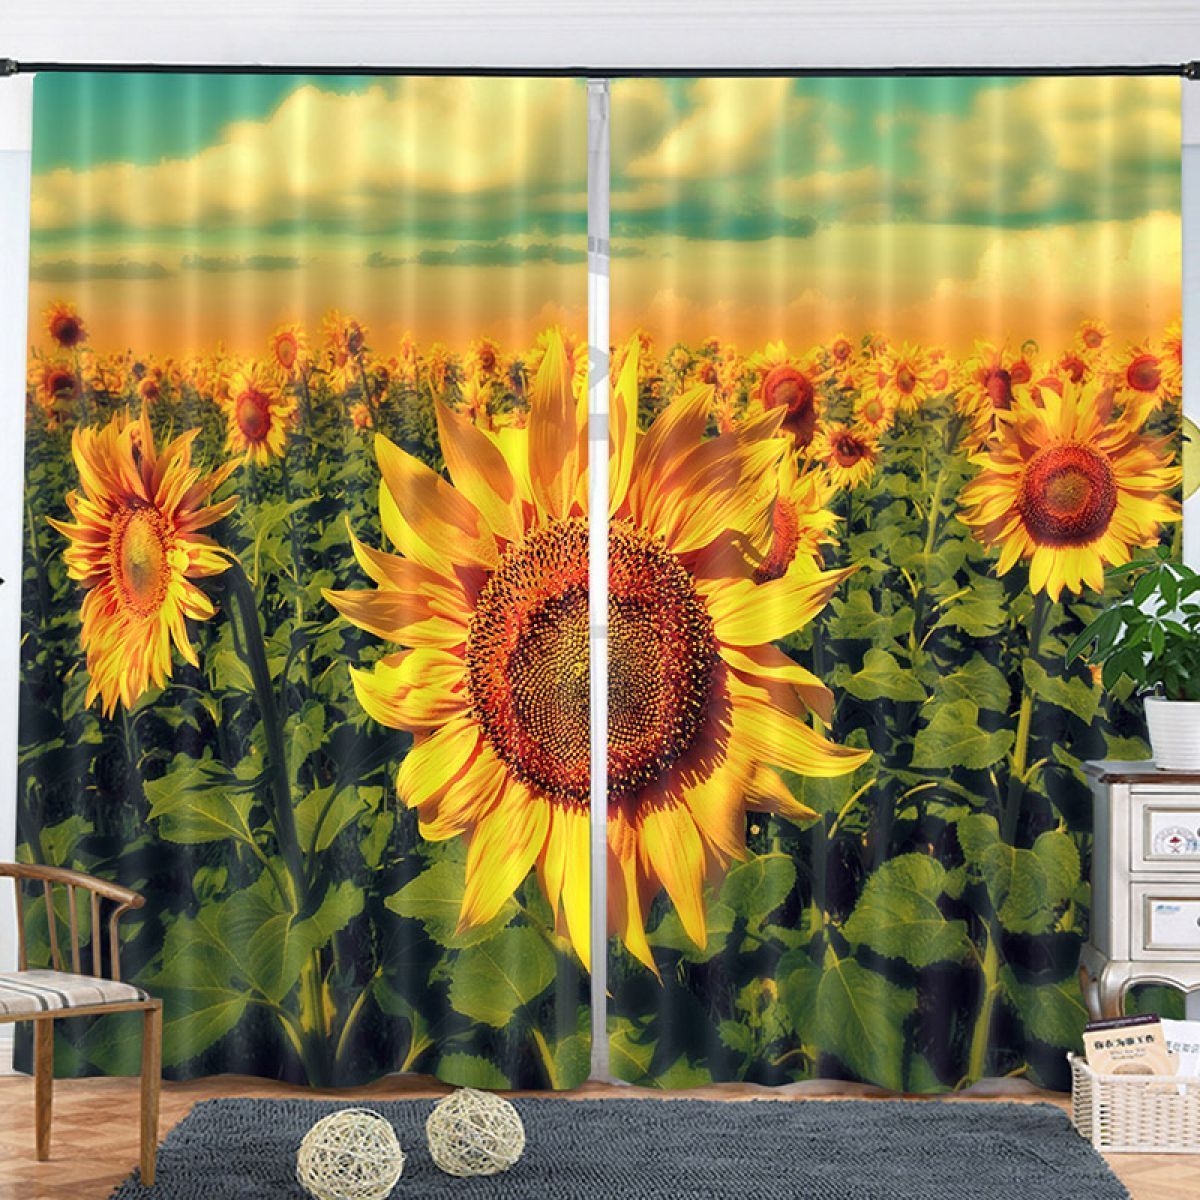 3d Sunflower Field At Sunset Printed Window Curtain Home Decor